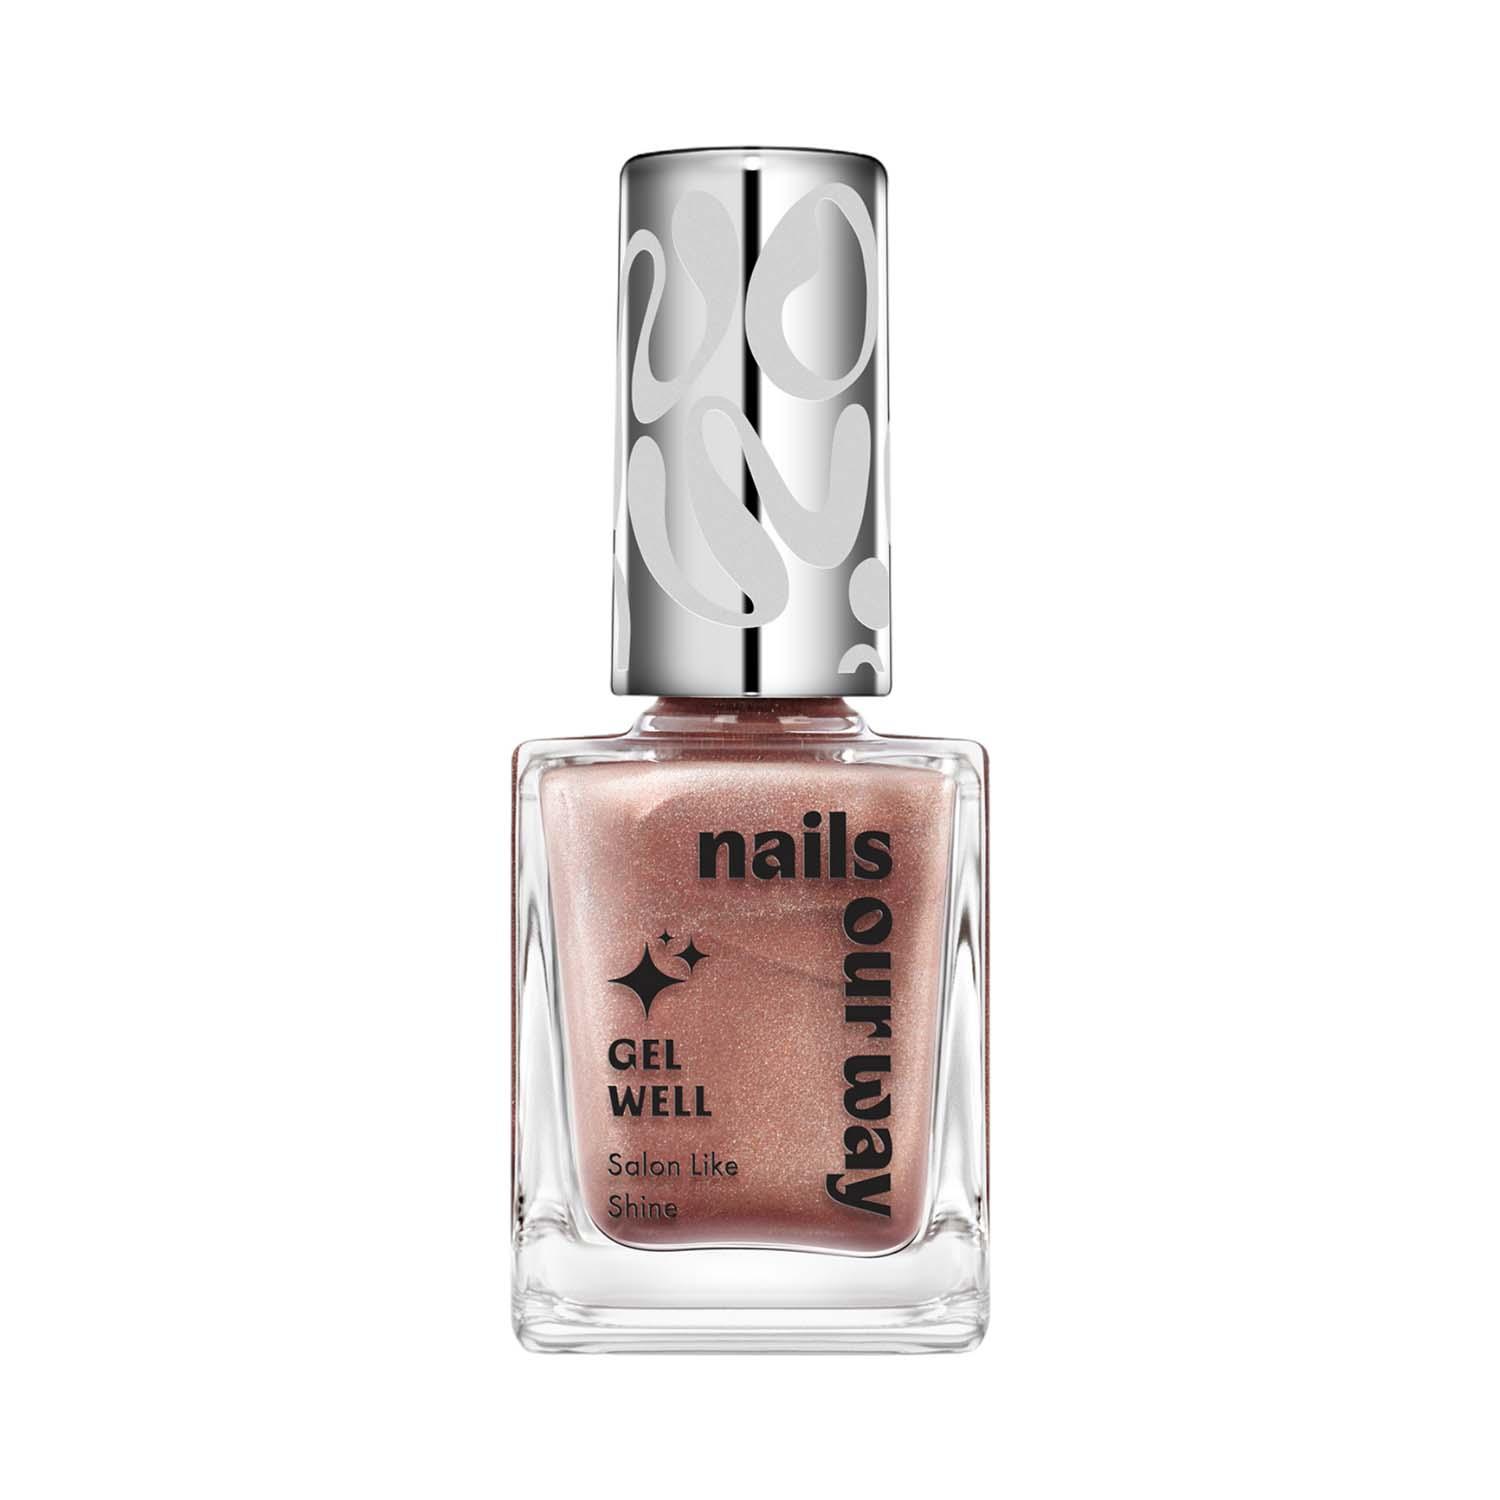 Nails Our Way | Nails Our Way Gel Well Nail Enamel - 602 Sparkling (10 ml)